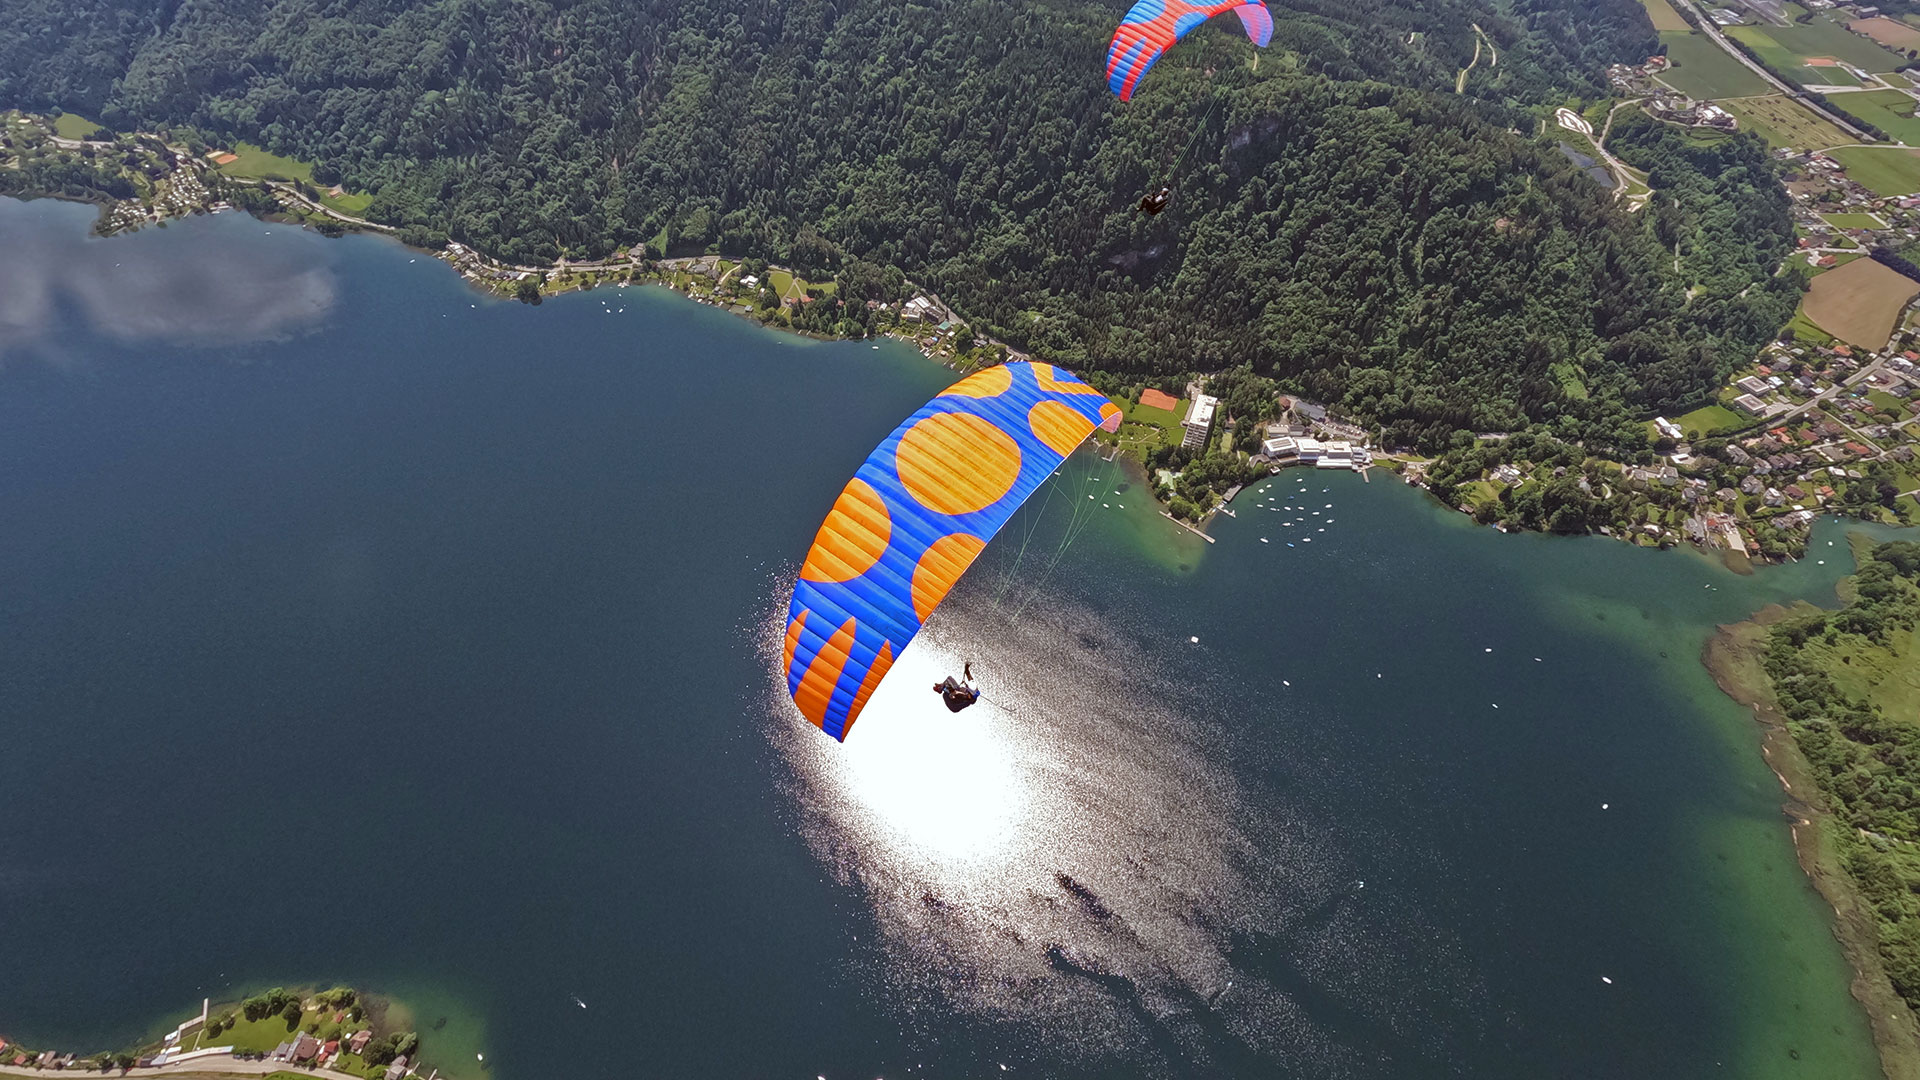 (c) Paragliding-ossiachersee.at